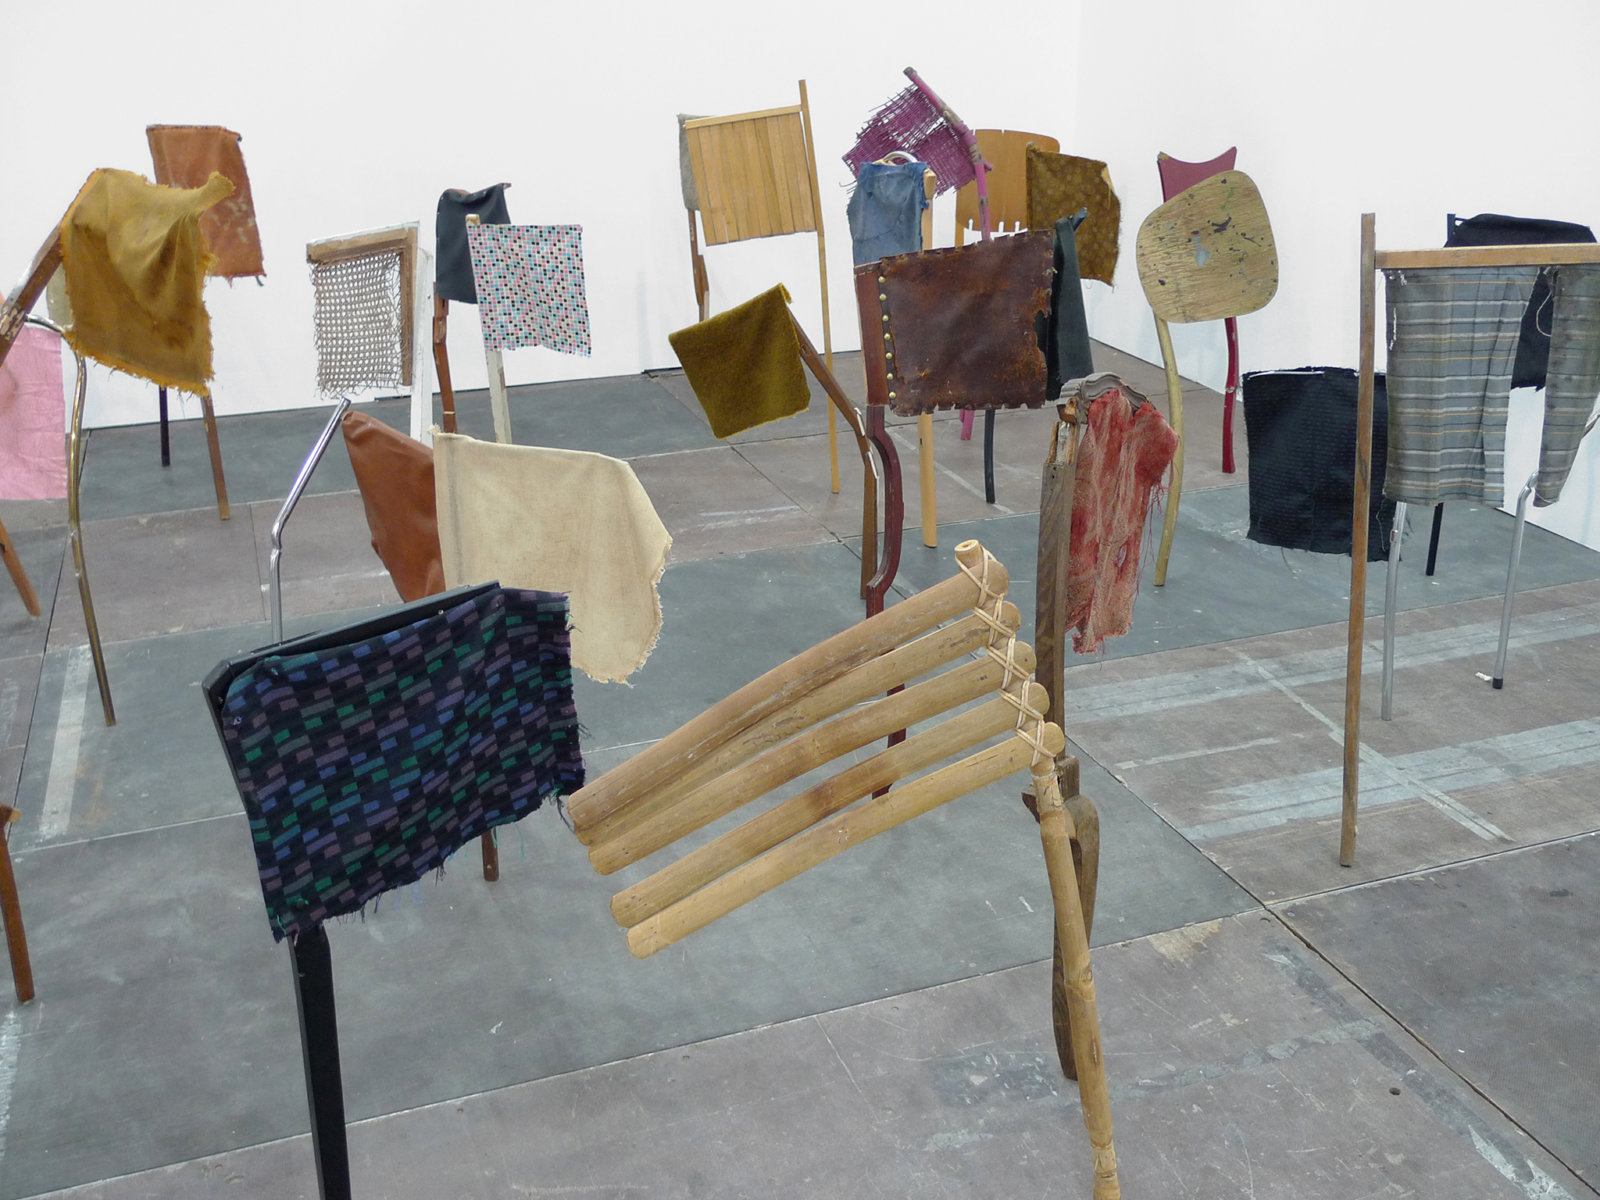 Ashes Withyman, Neither Here Nor There, 2009, textile, wood, plastic and metal, dimensions variable